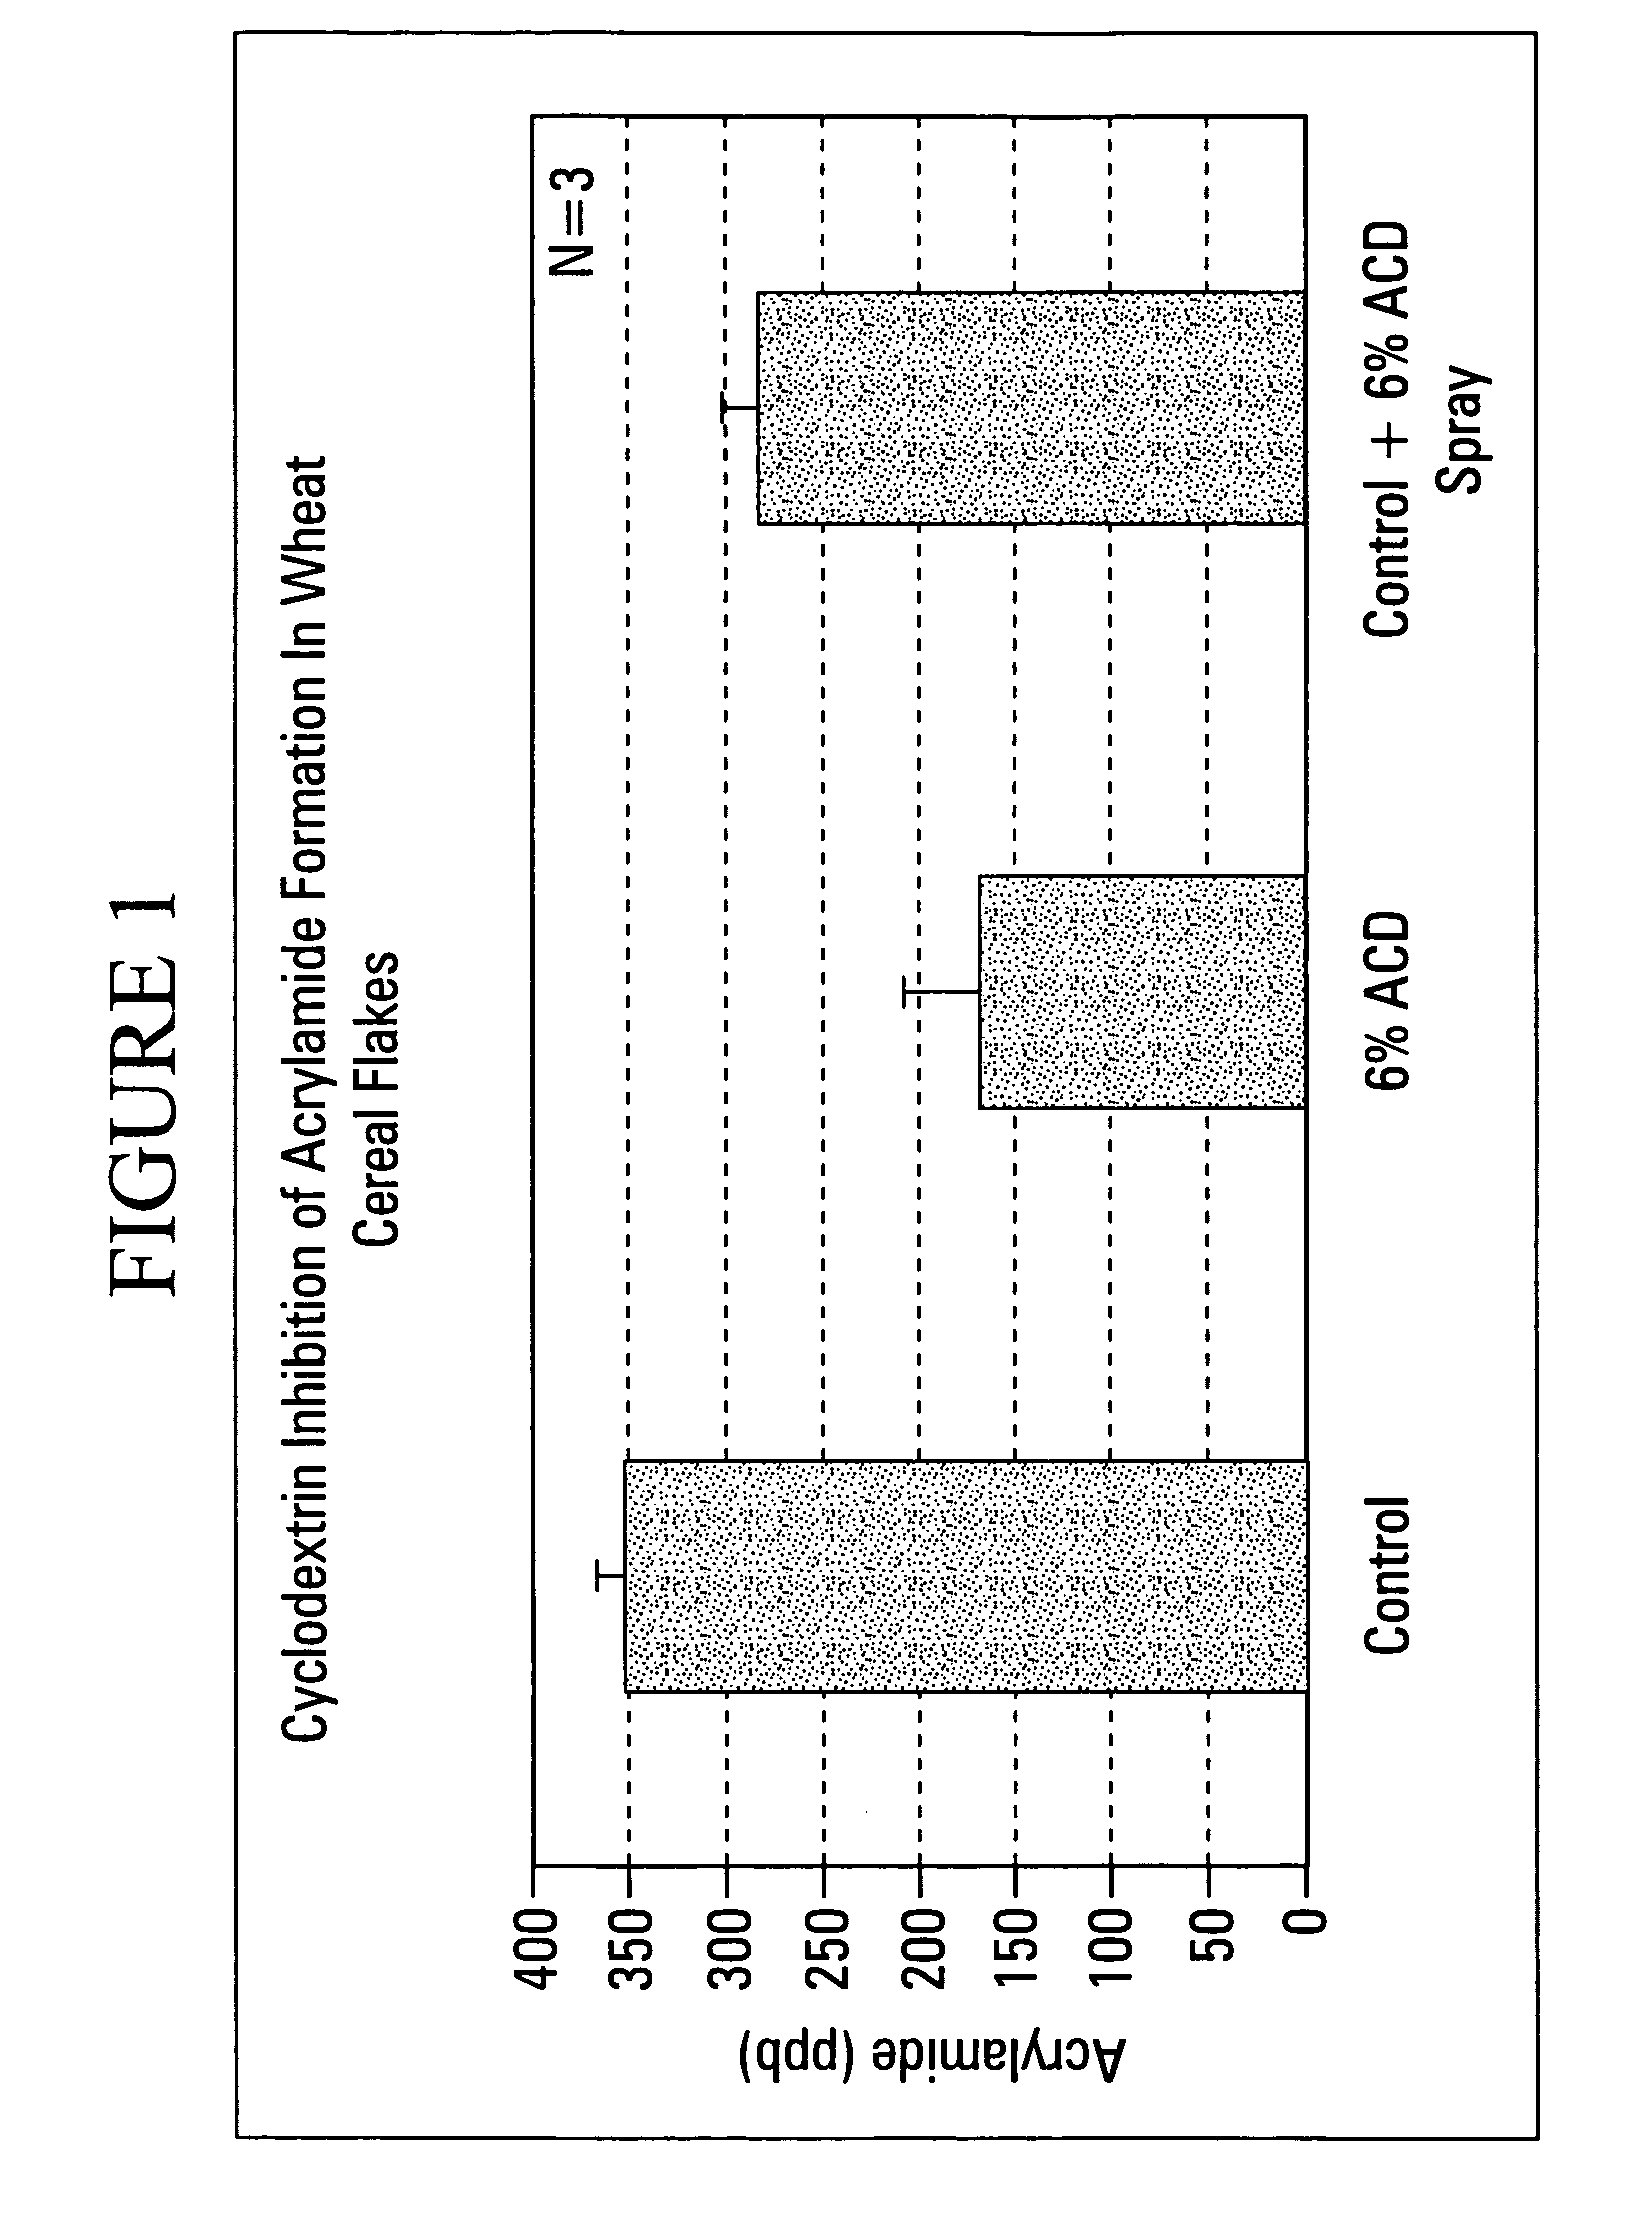 Method for preventing acrylamide formation in food products and food intermediates